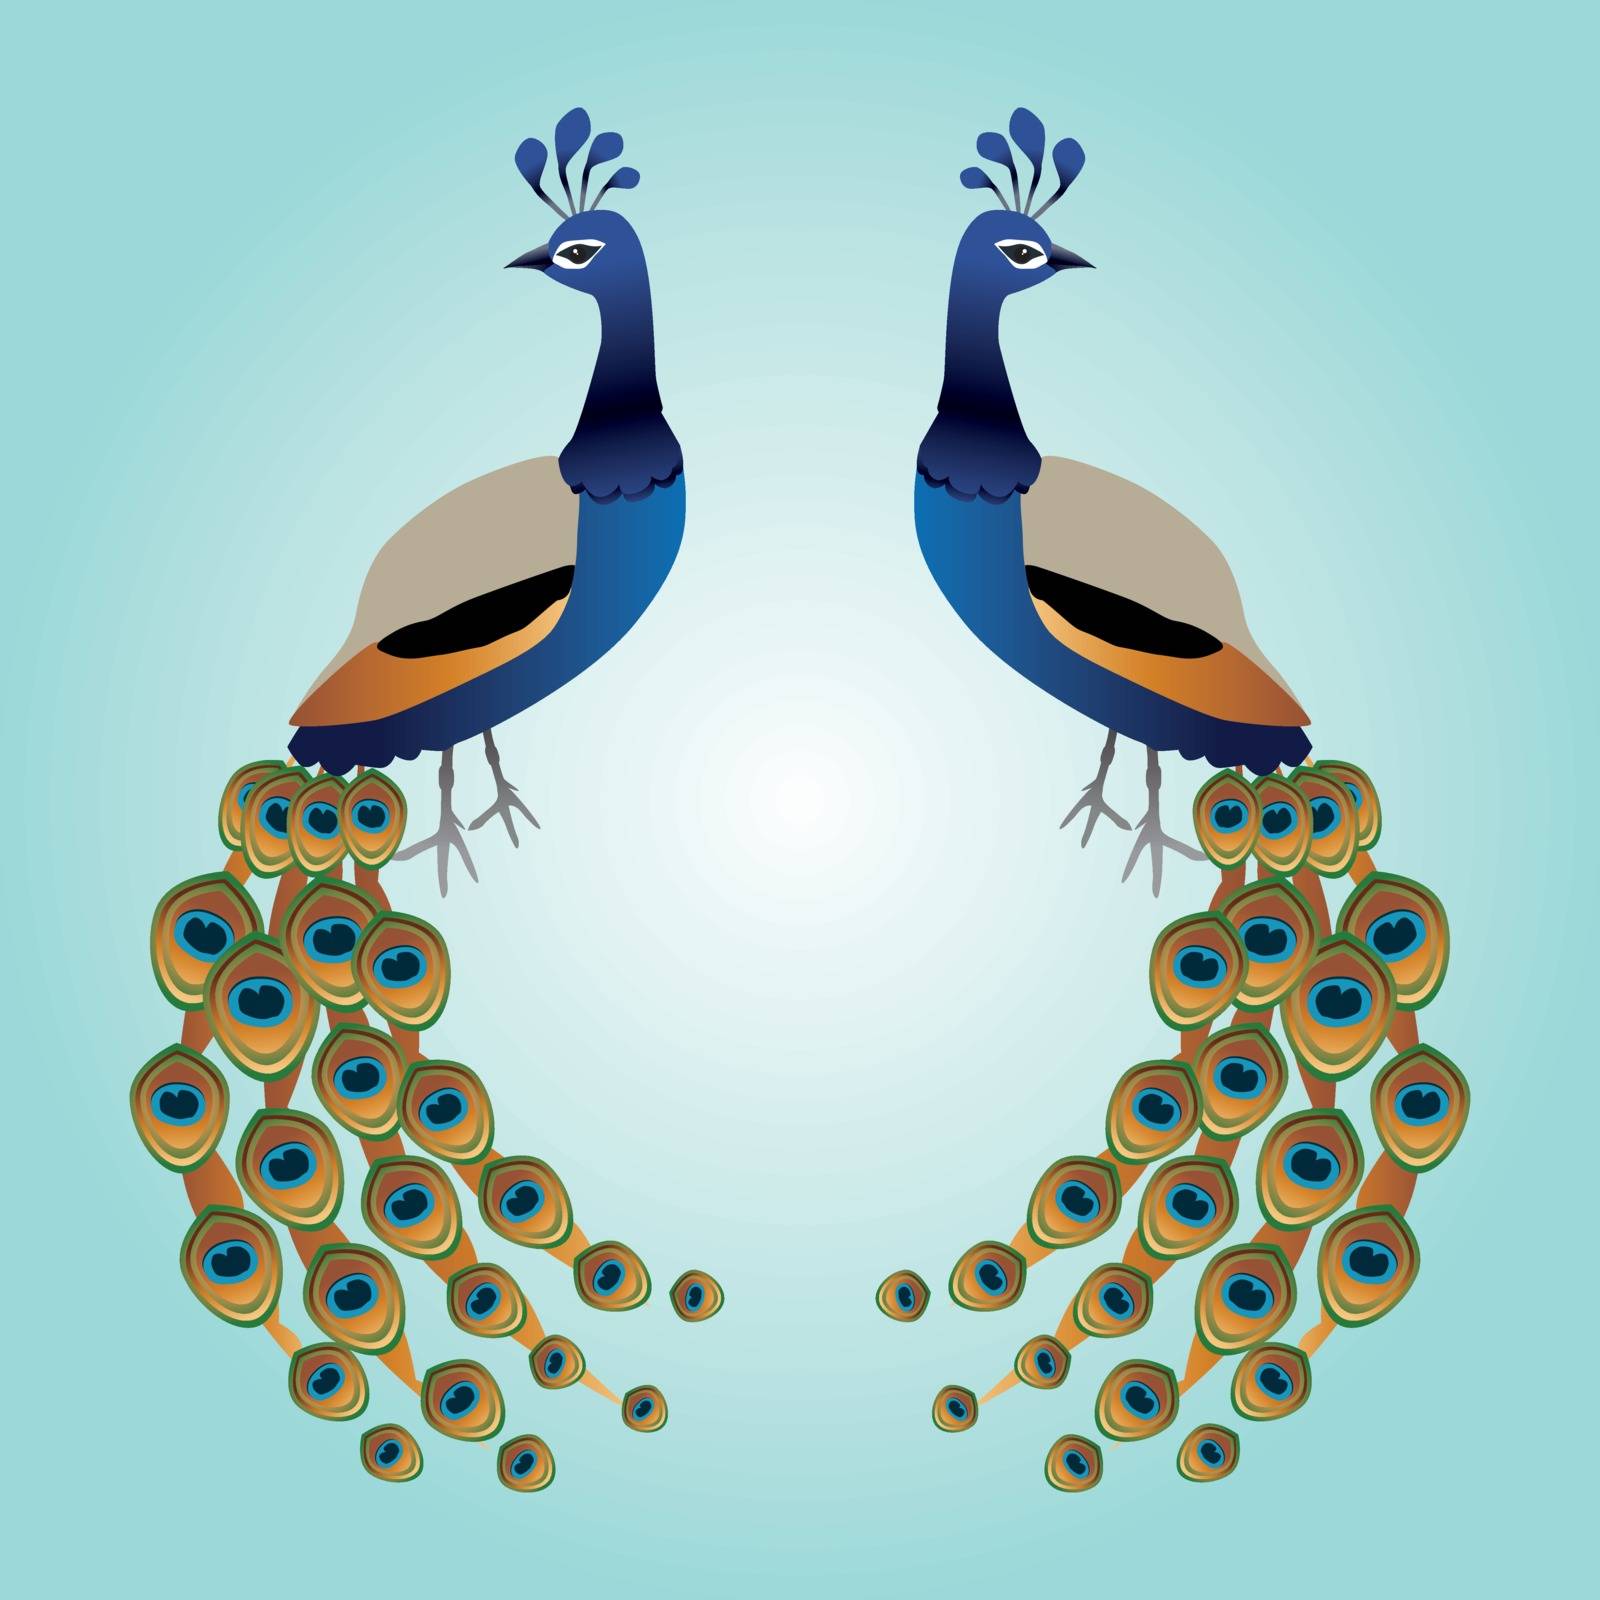 Two Peacocks by Bwise